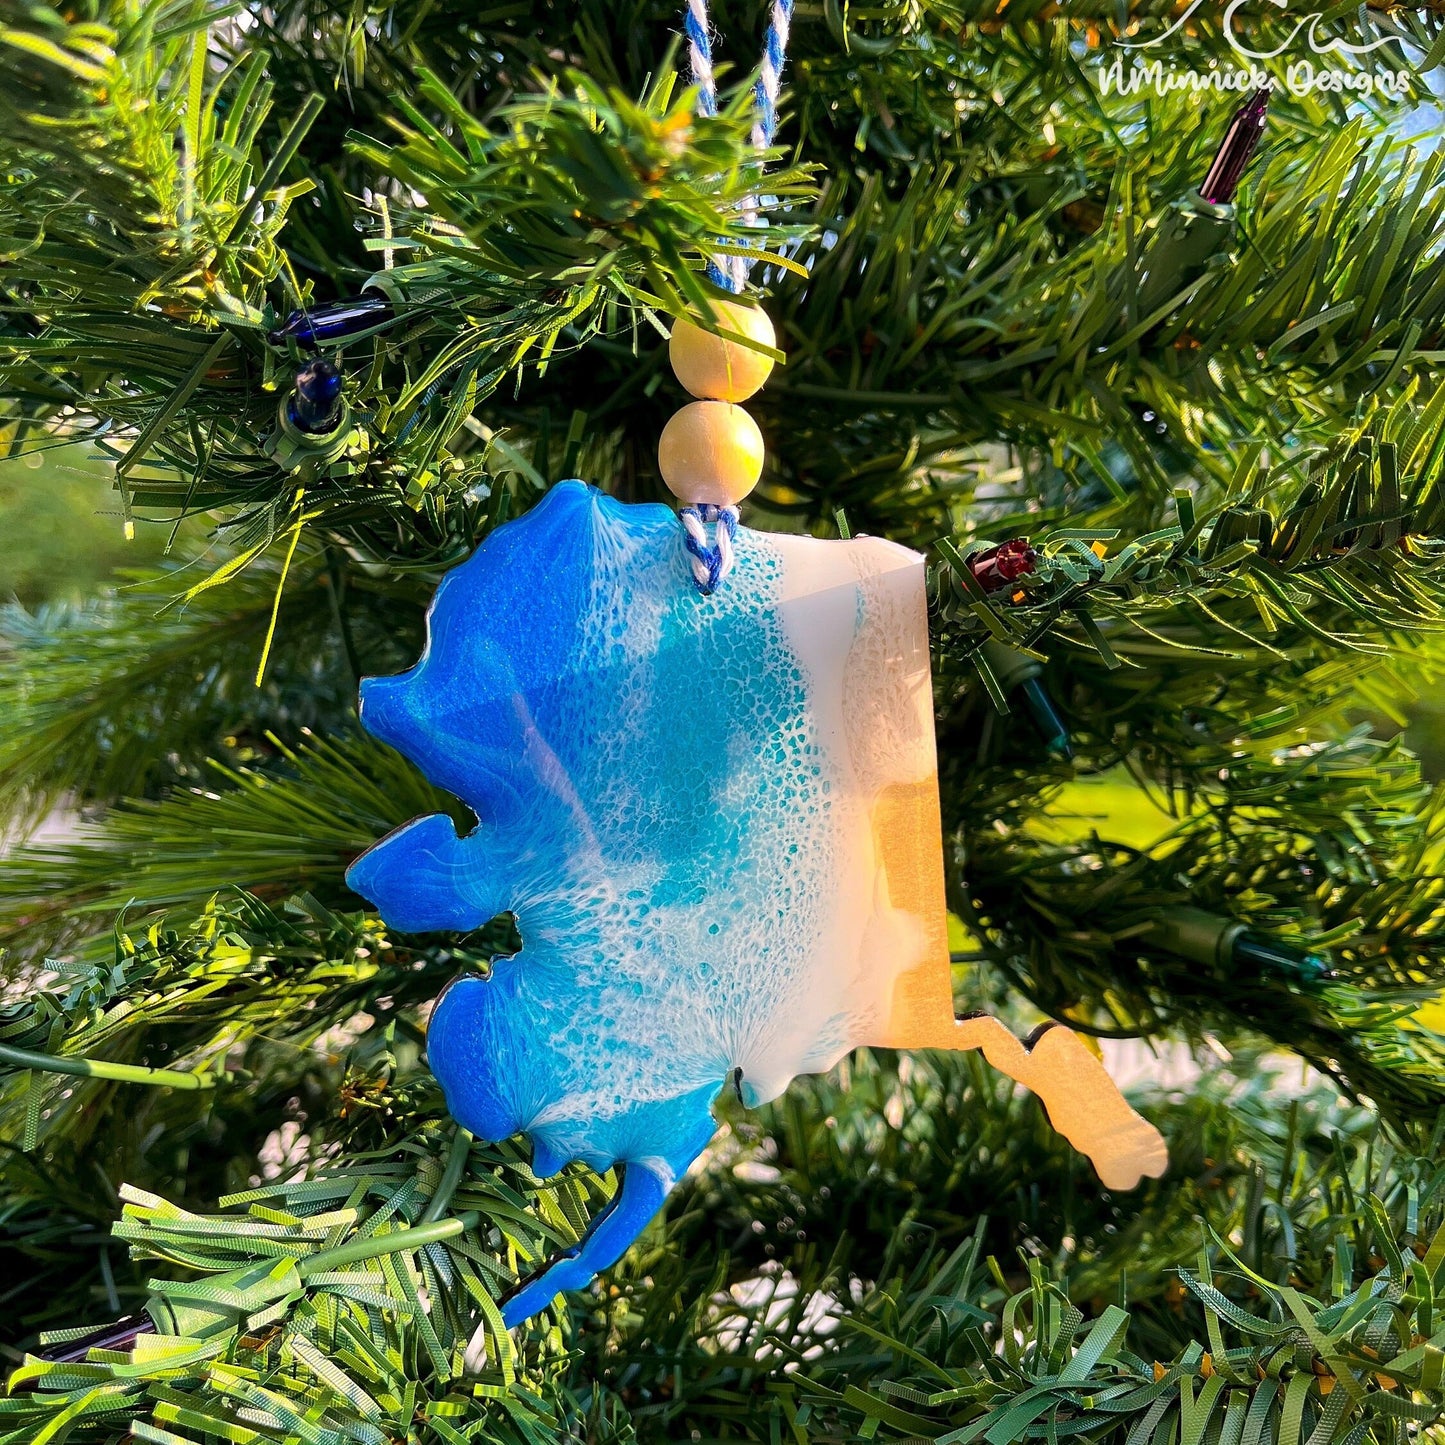 Alaska-shaped wooden Christmas ornament covered in blue and teal colored ocean resin art resembling the waves along Alaska&#39;s Pacific Coast. Finished with blue and white baker&#39;s twine and two wooden beads.